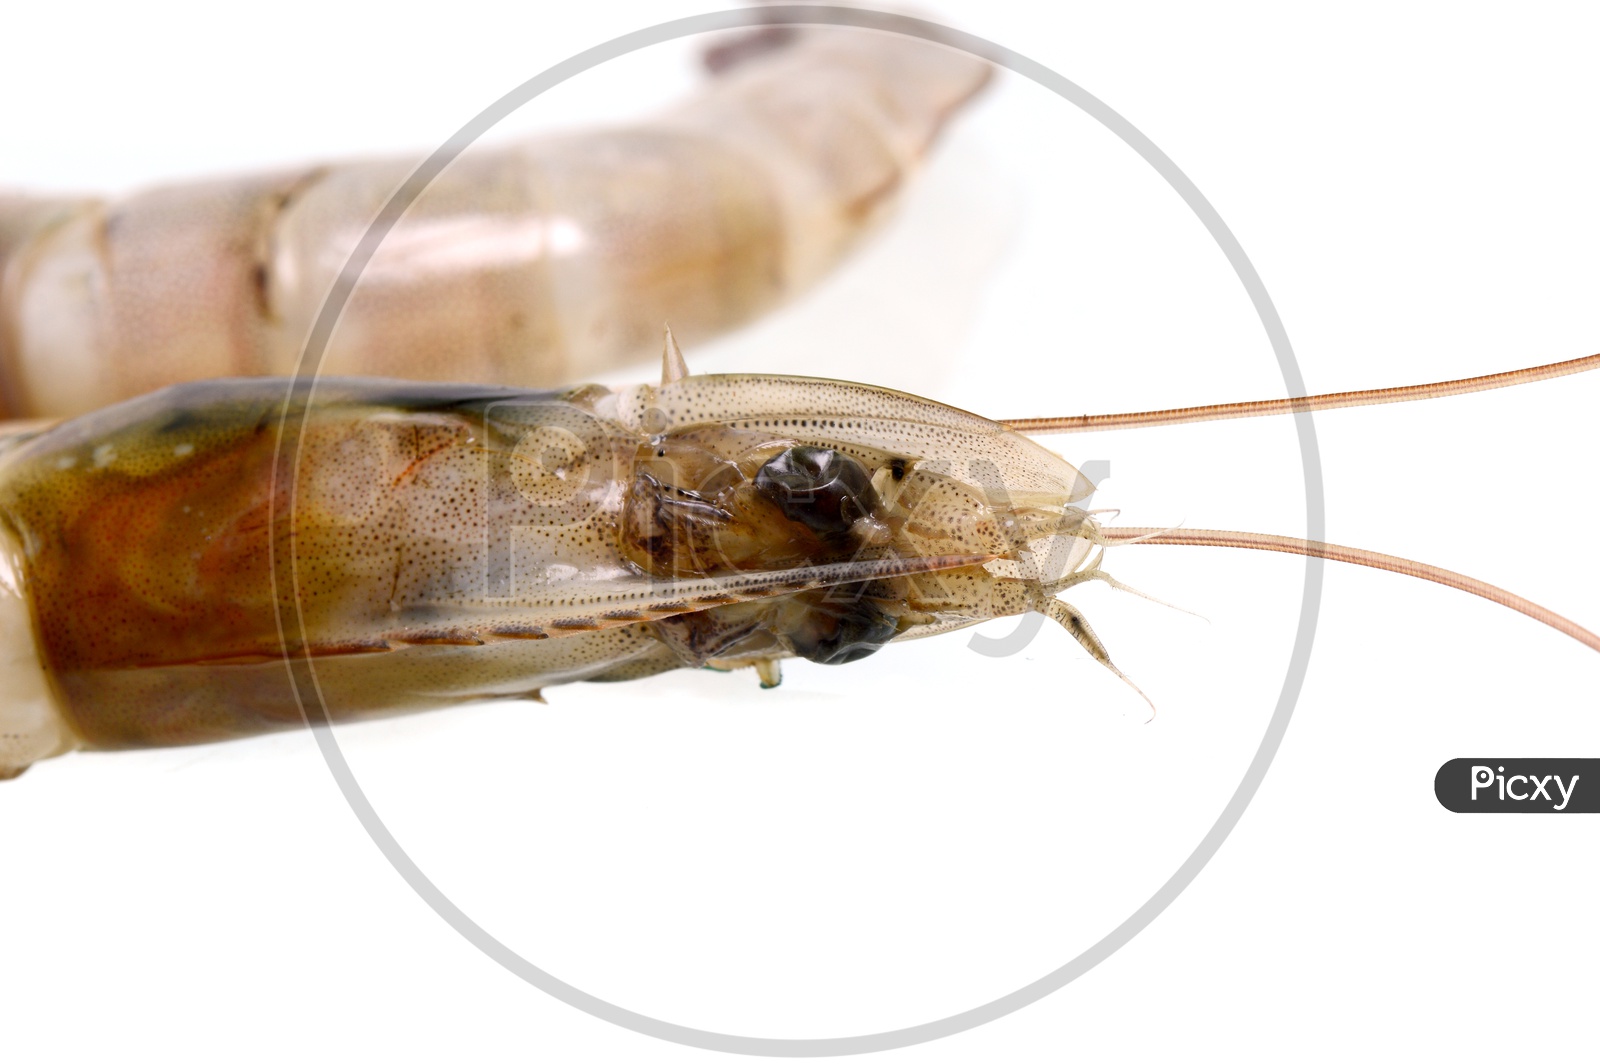 Fresh Prawn Or Shrimp  Placed On an Isolated White Background